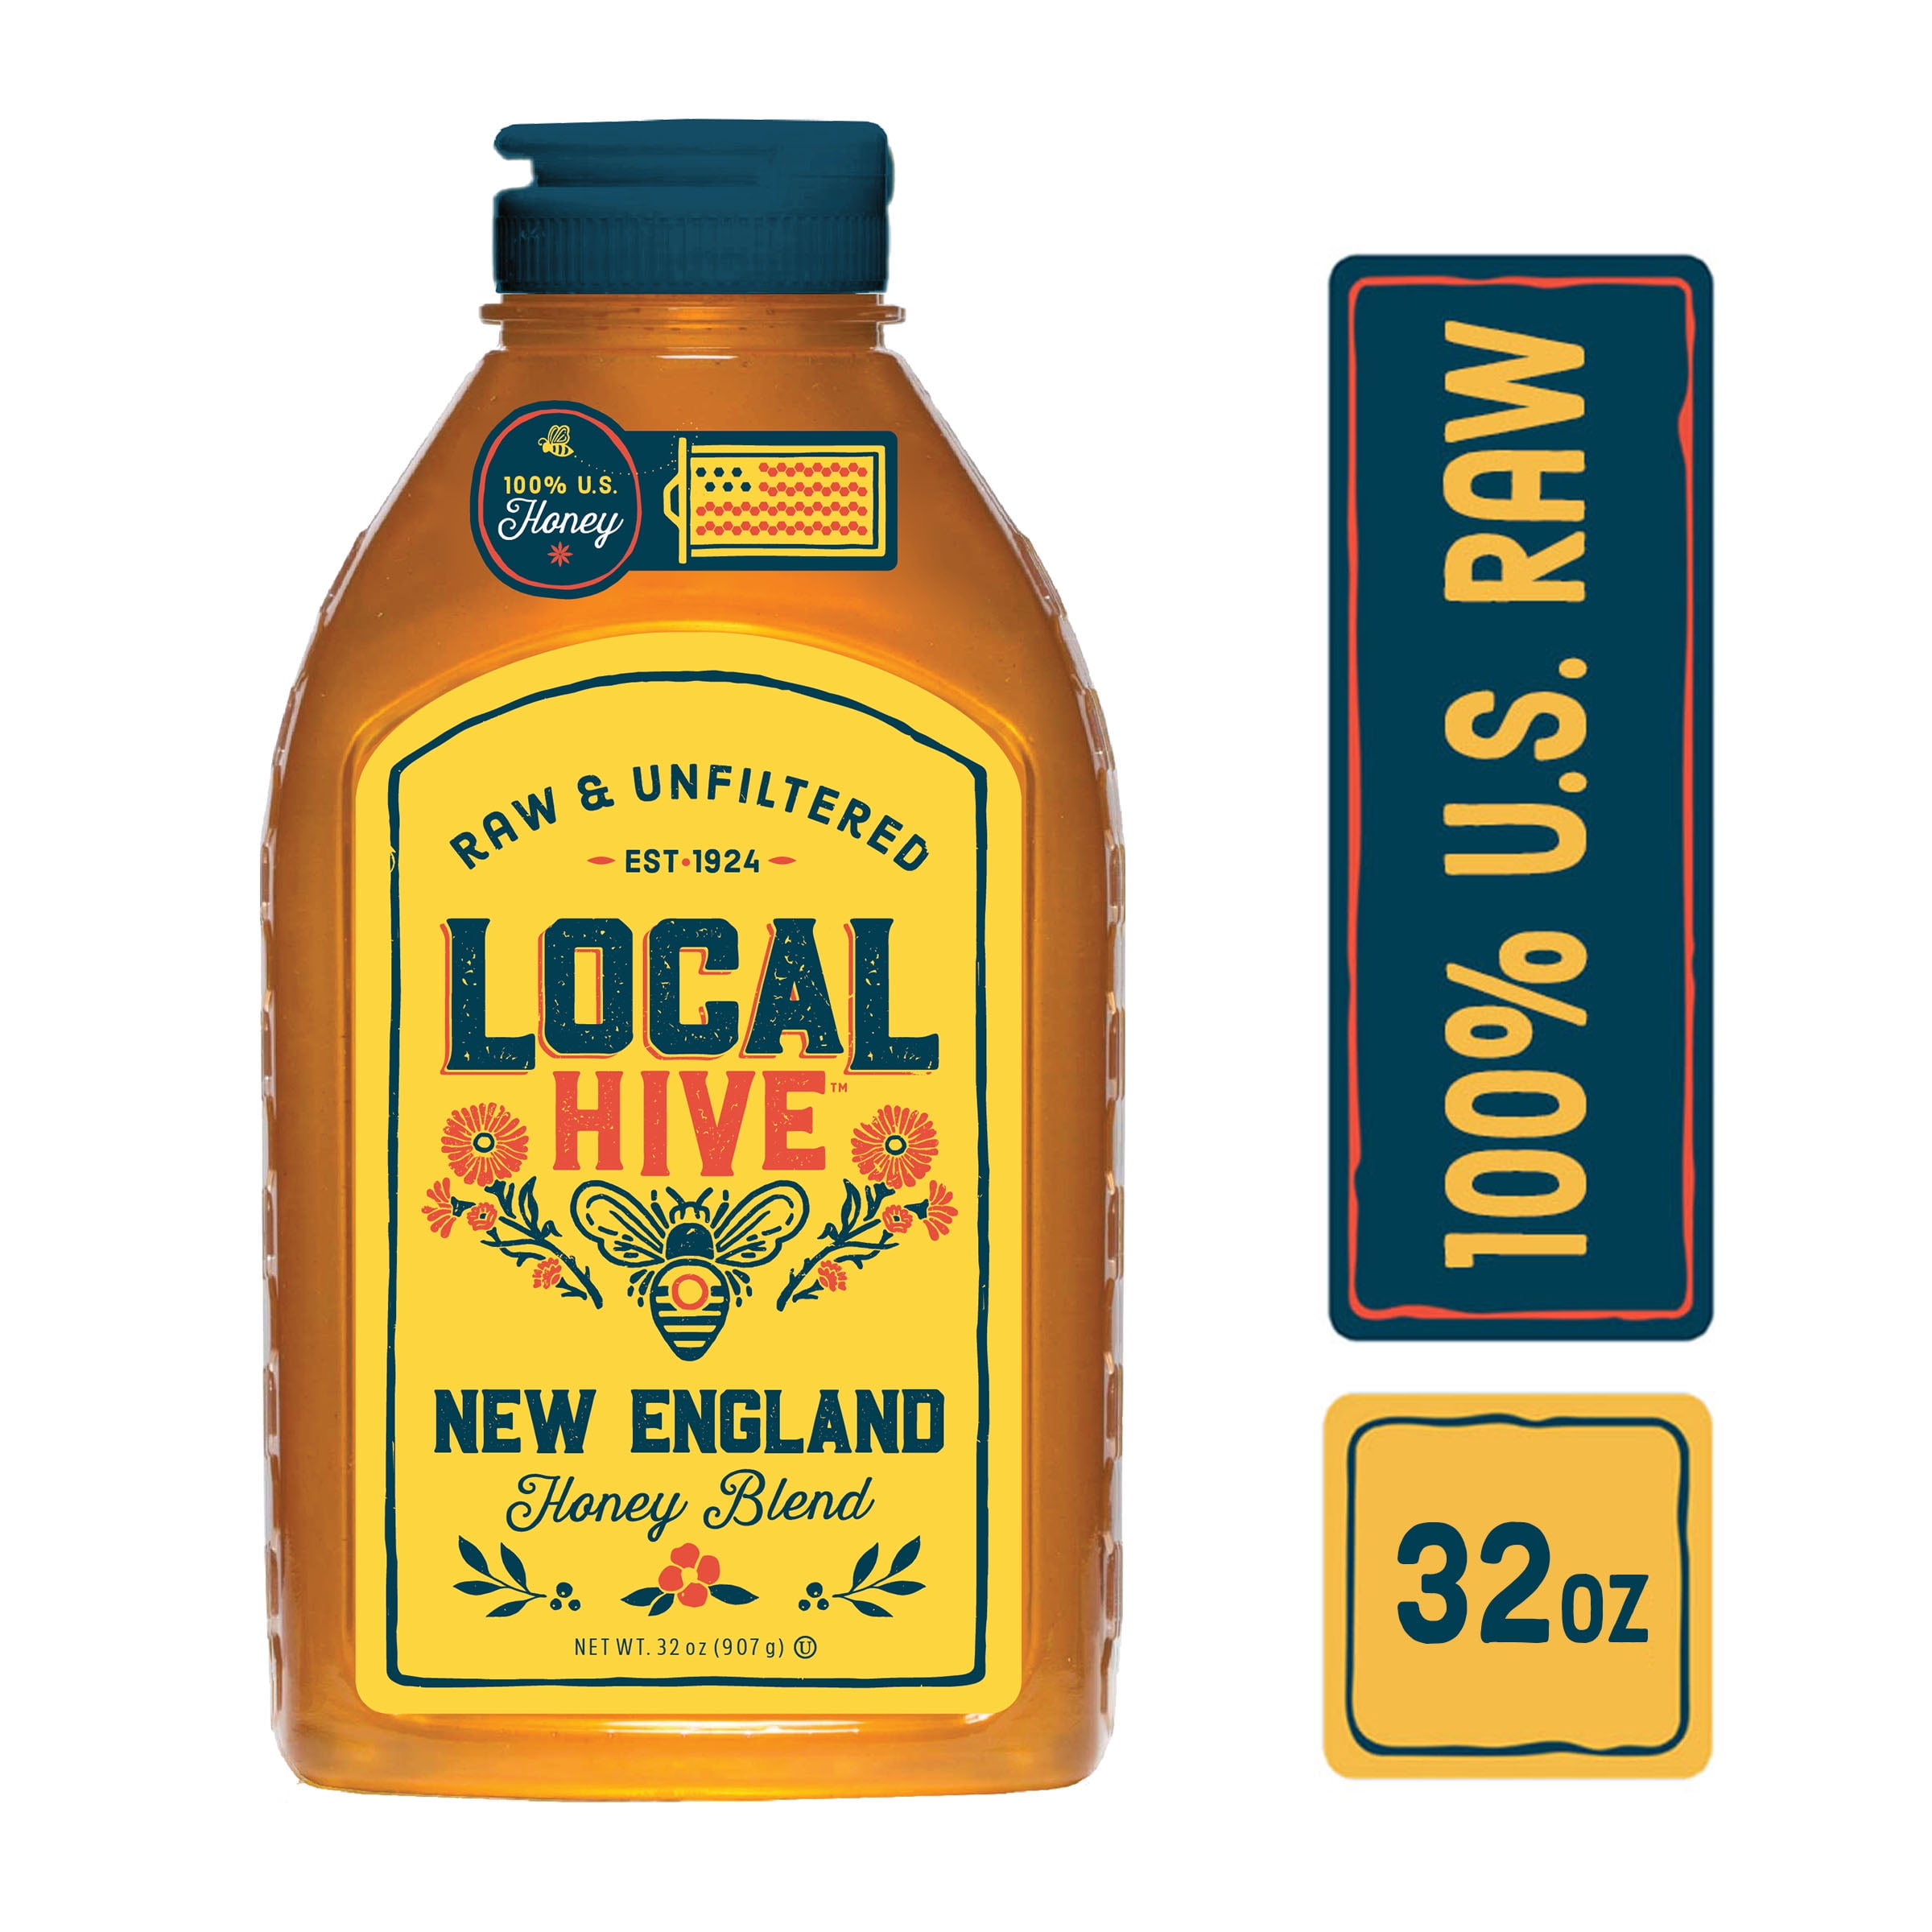 Local Hive,  Raw & Unfiltered, 100% U.S New England Honey Blend, 32oz